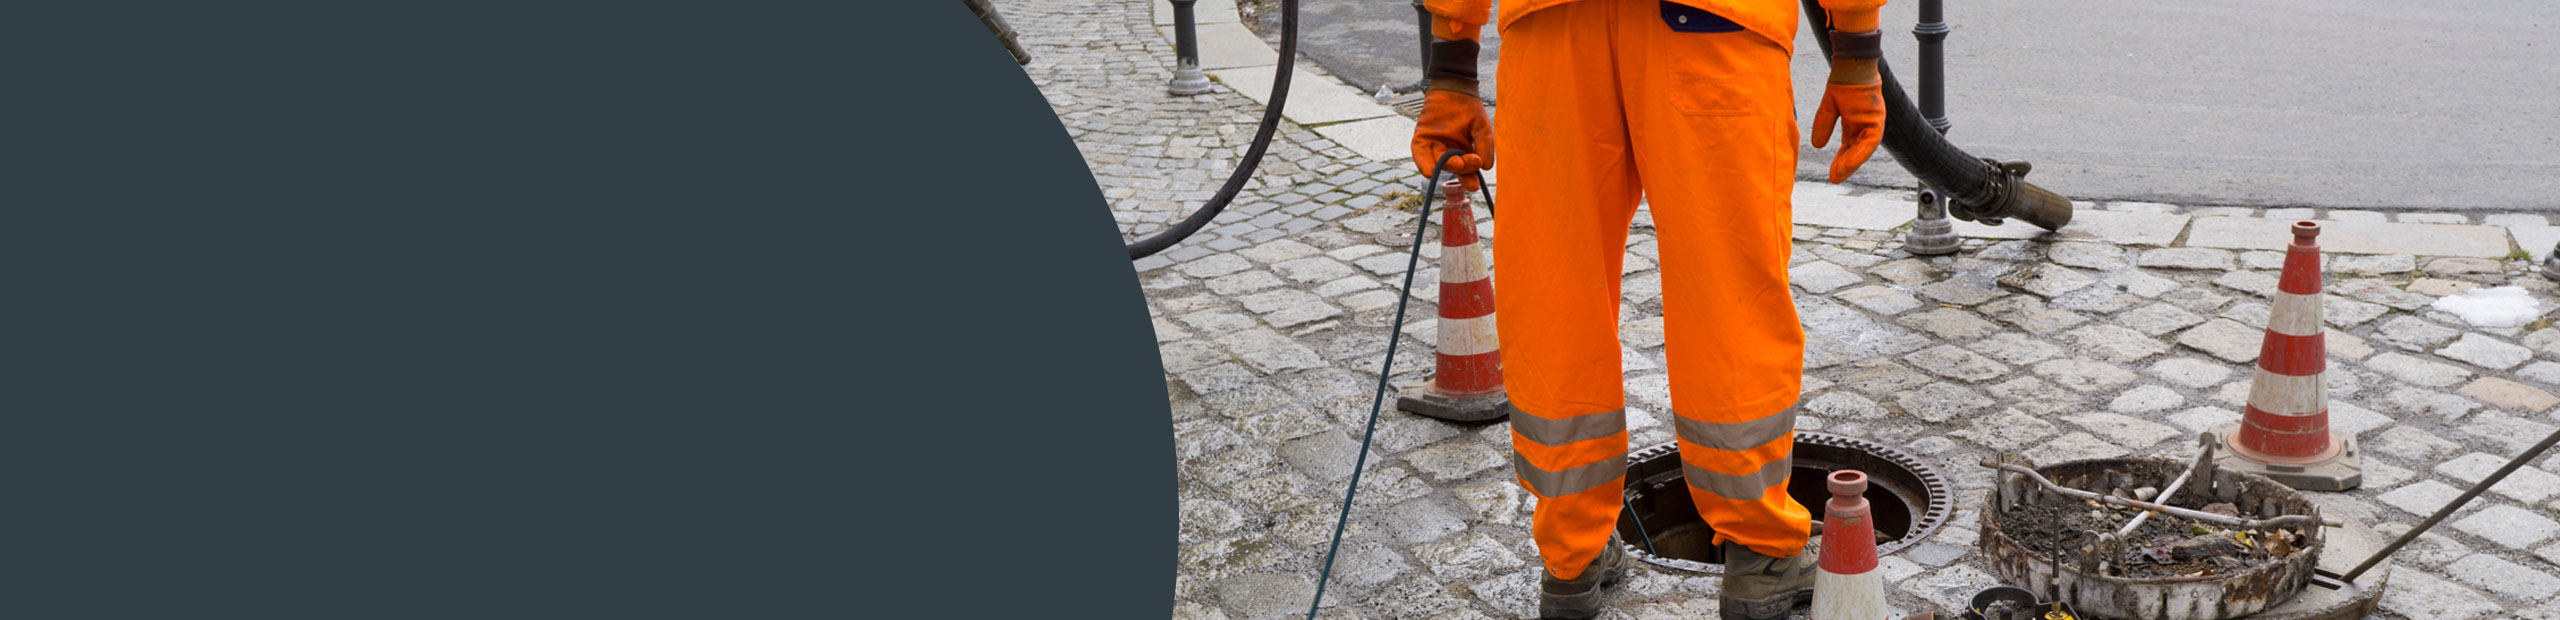 Sewage Cleaning Services - Harrow